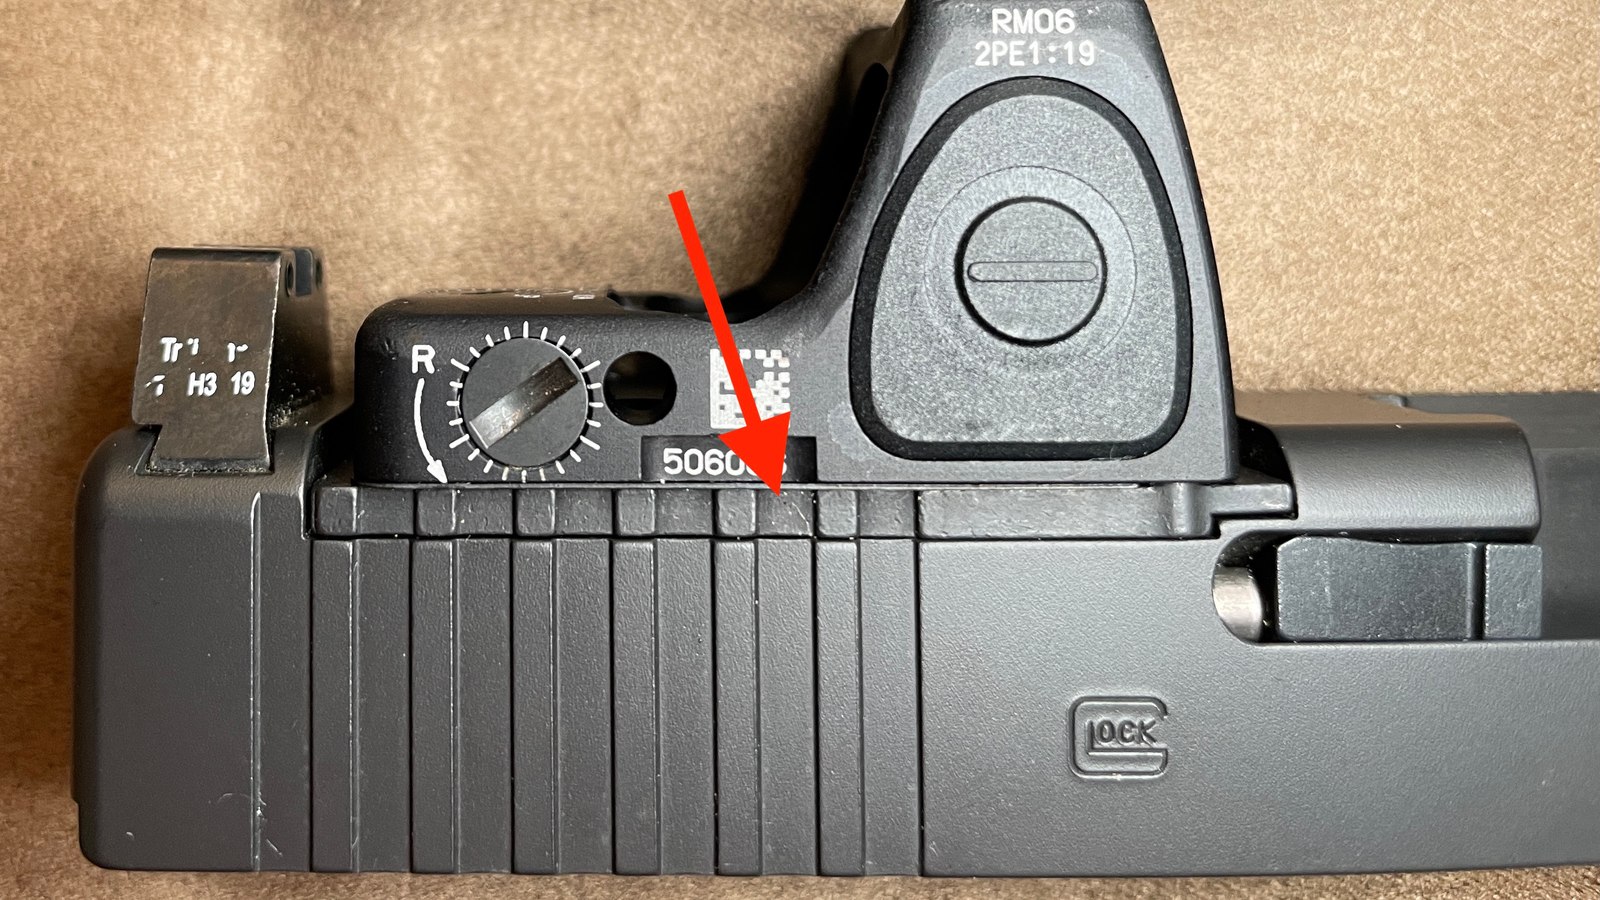 How to mount a red dot sight on a pistol